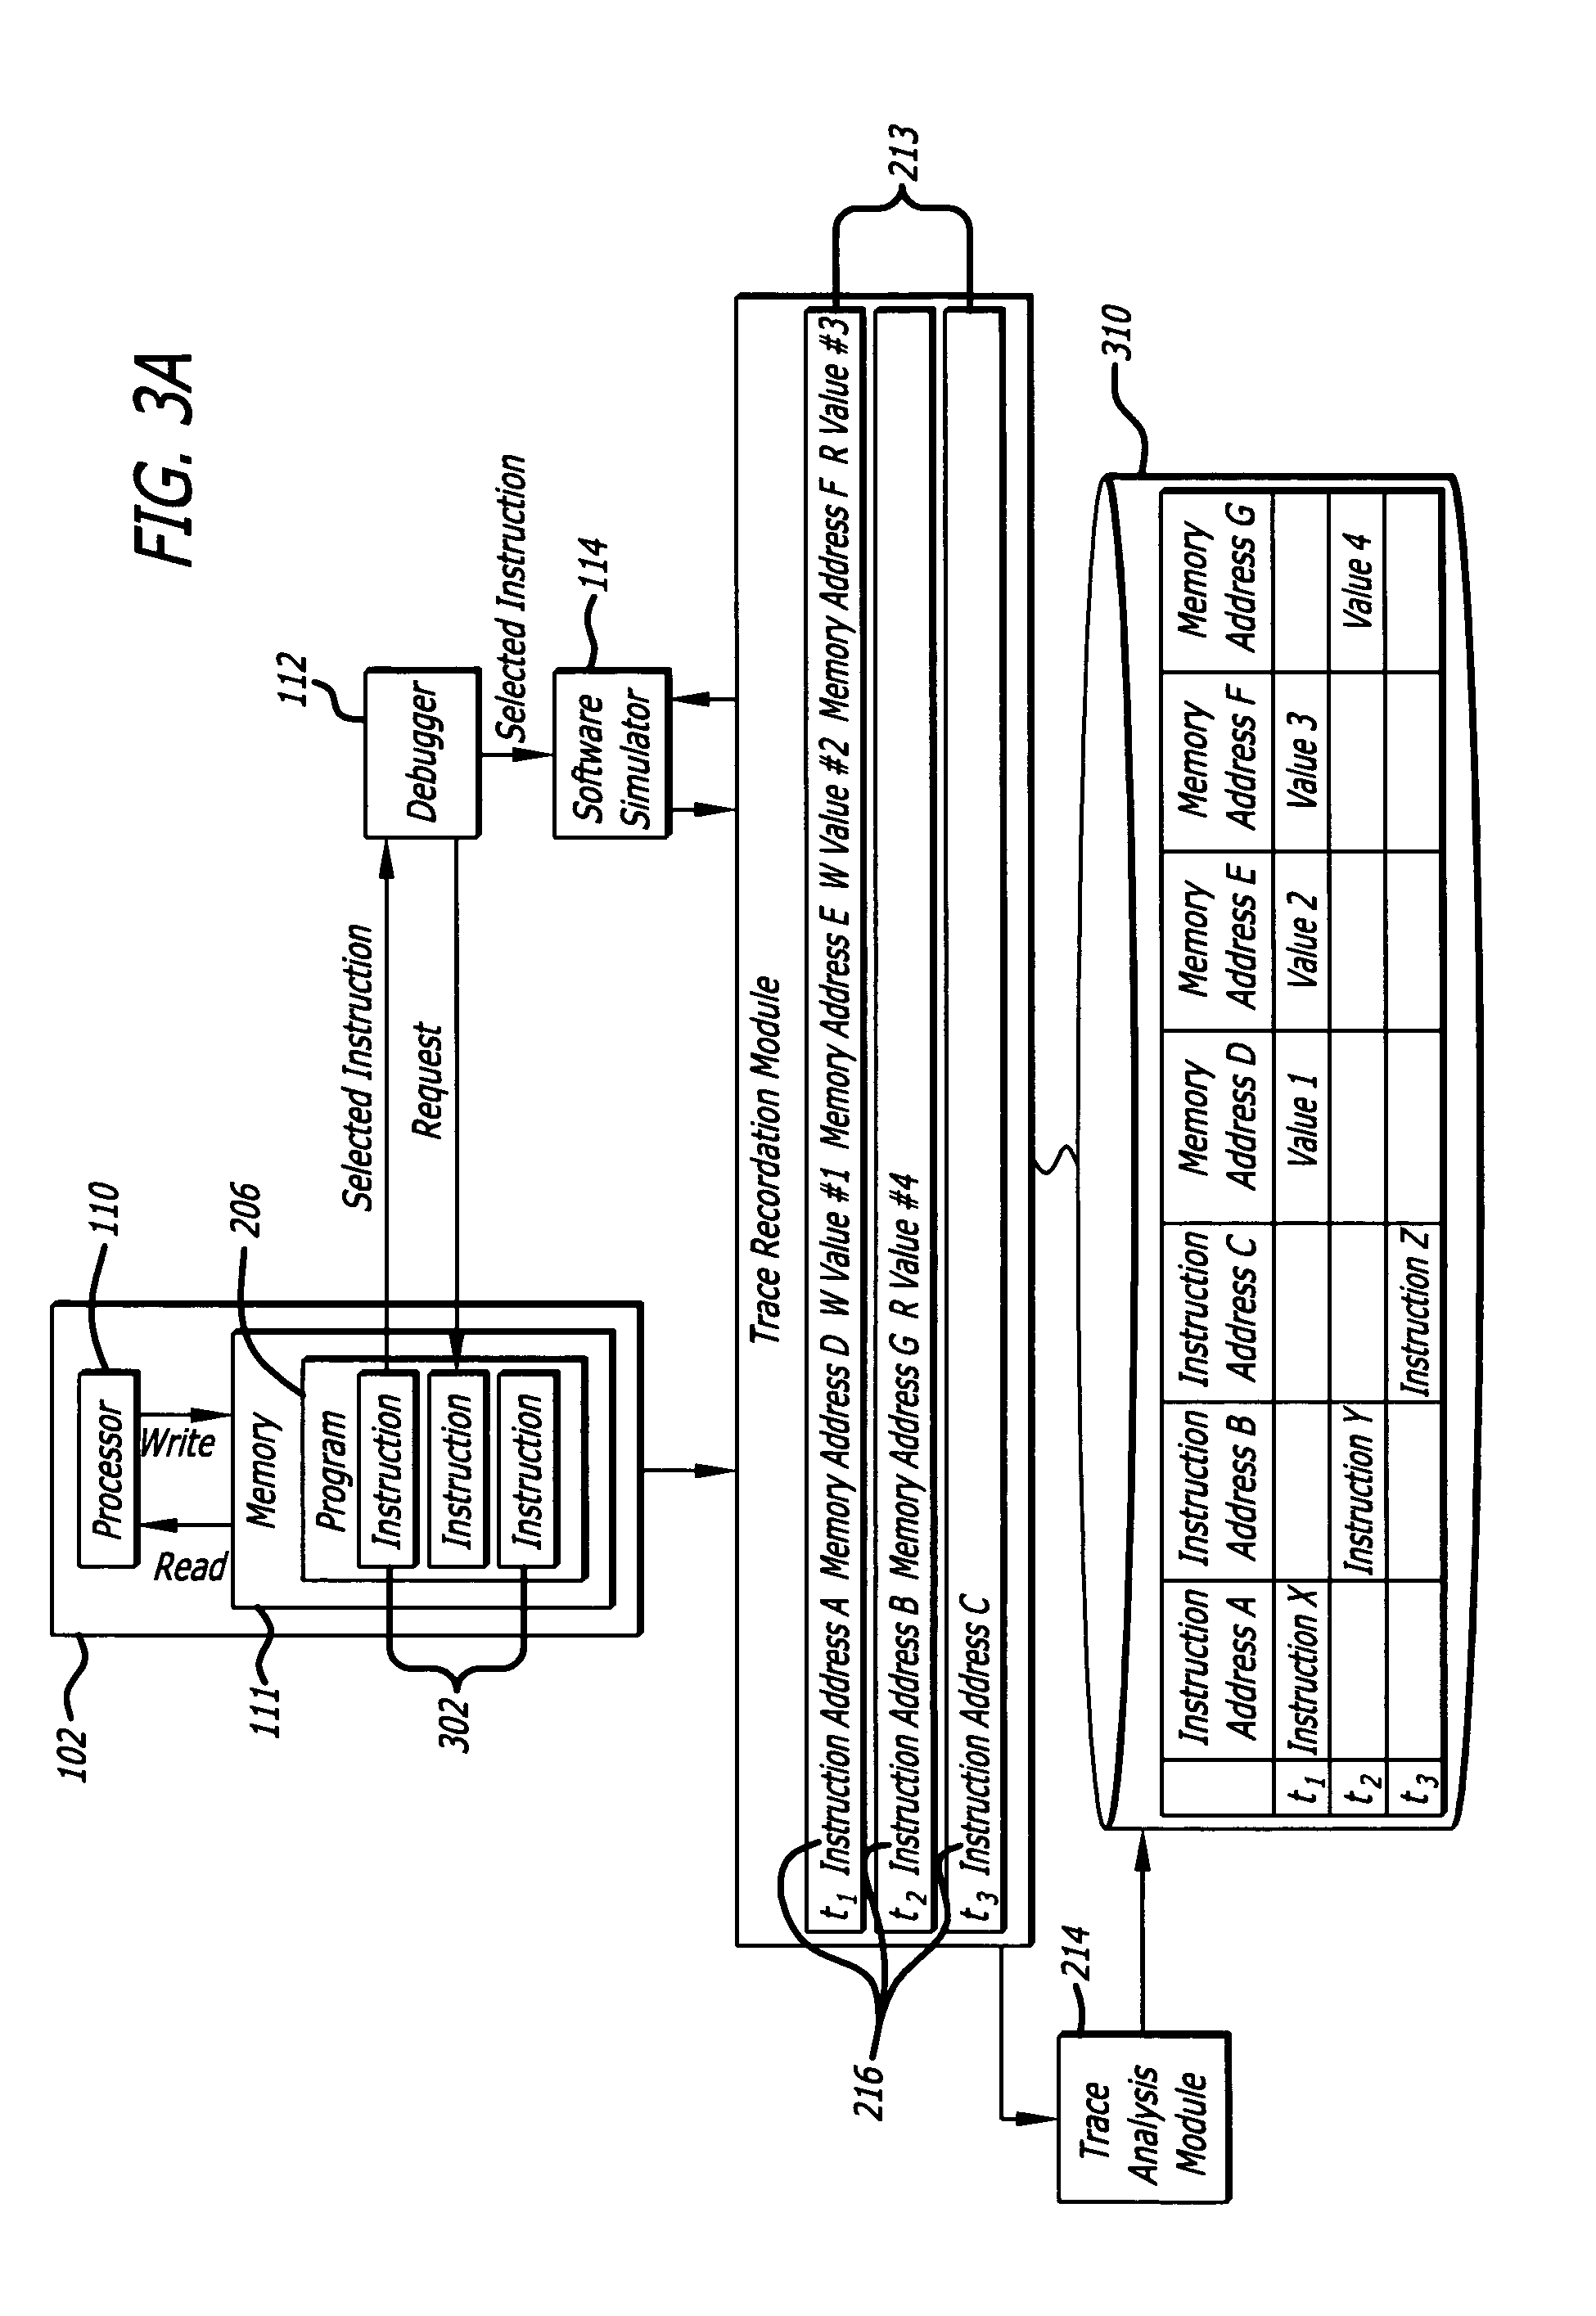 Post-execution software debugger with performance display